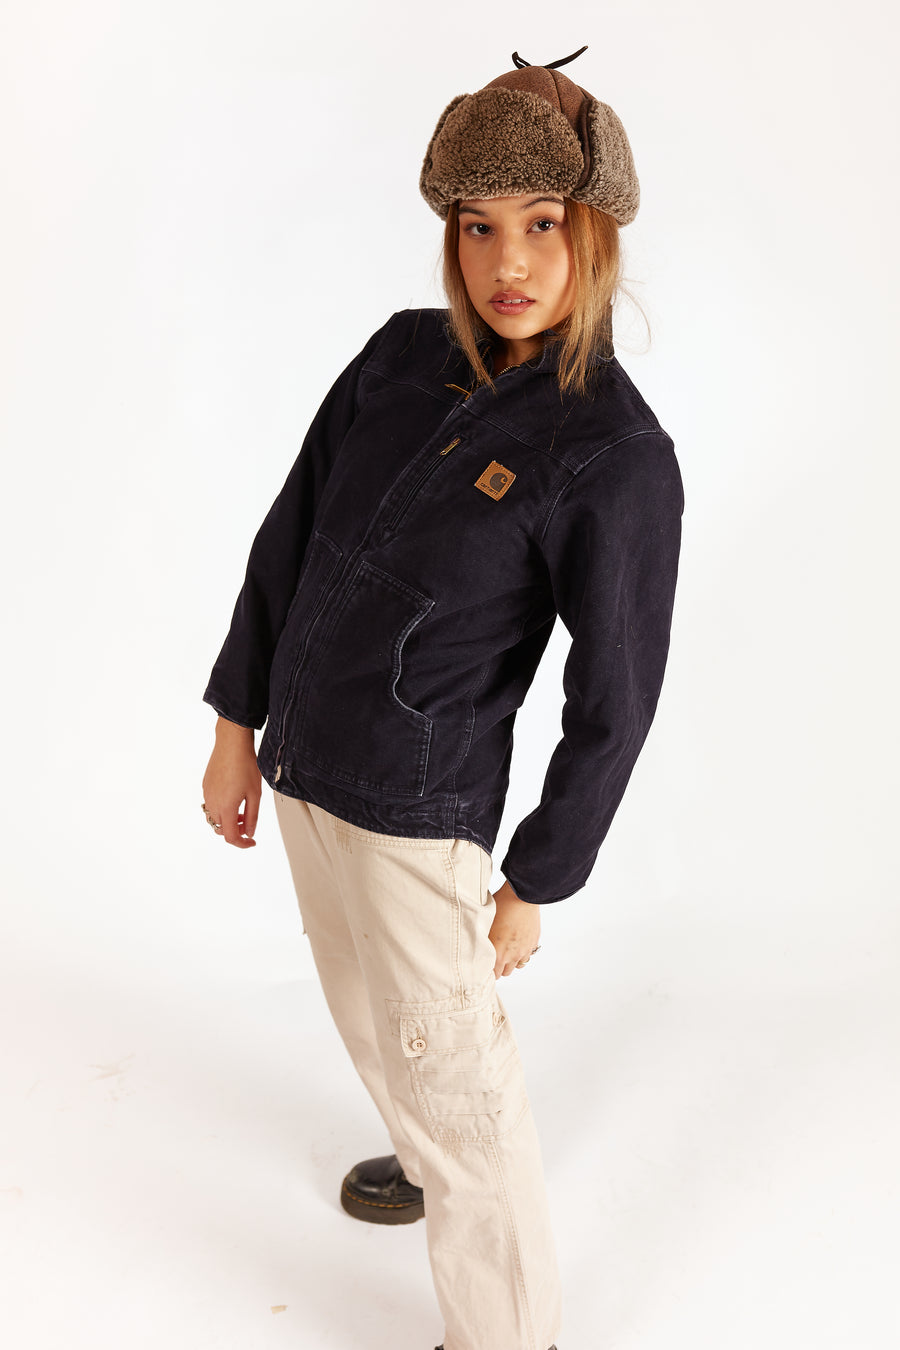 Carhartt Sherpa Lined Jacket in a vintage style from thrift store Twise Studio